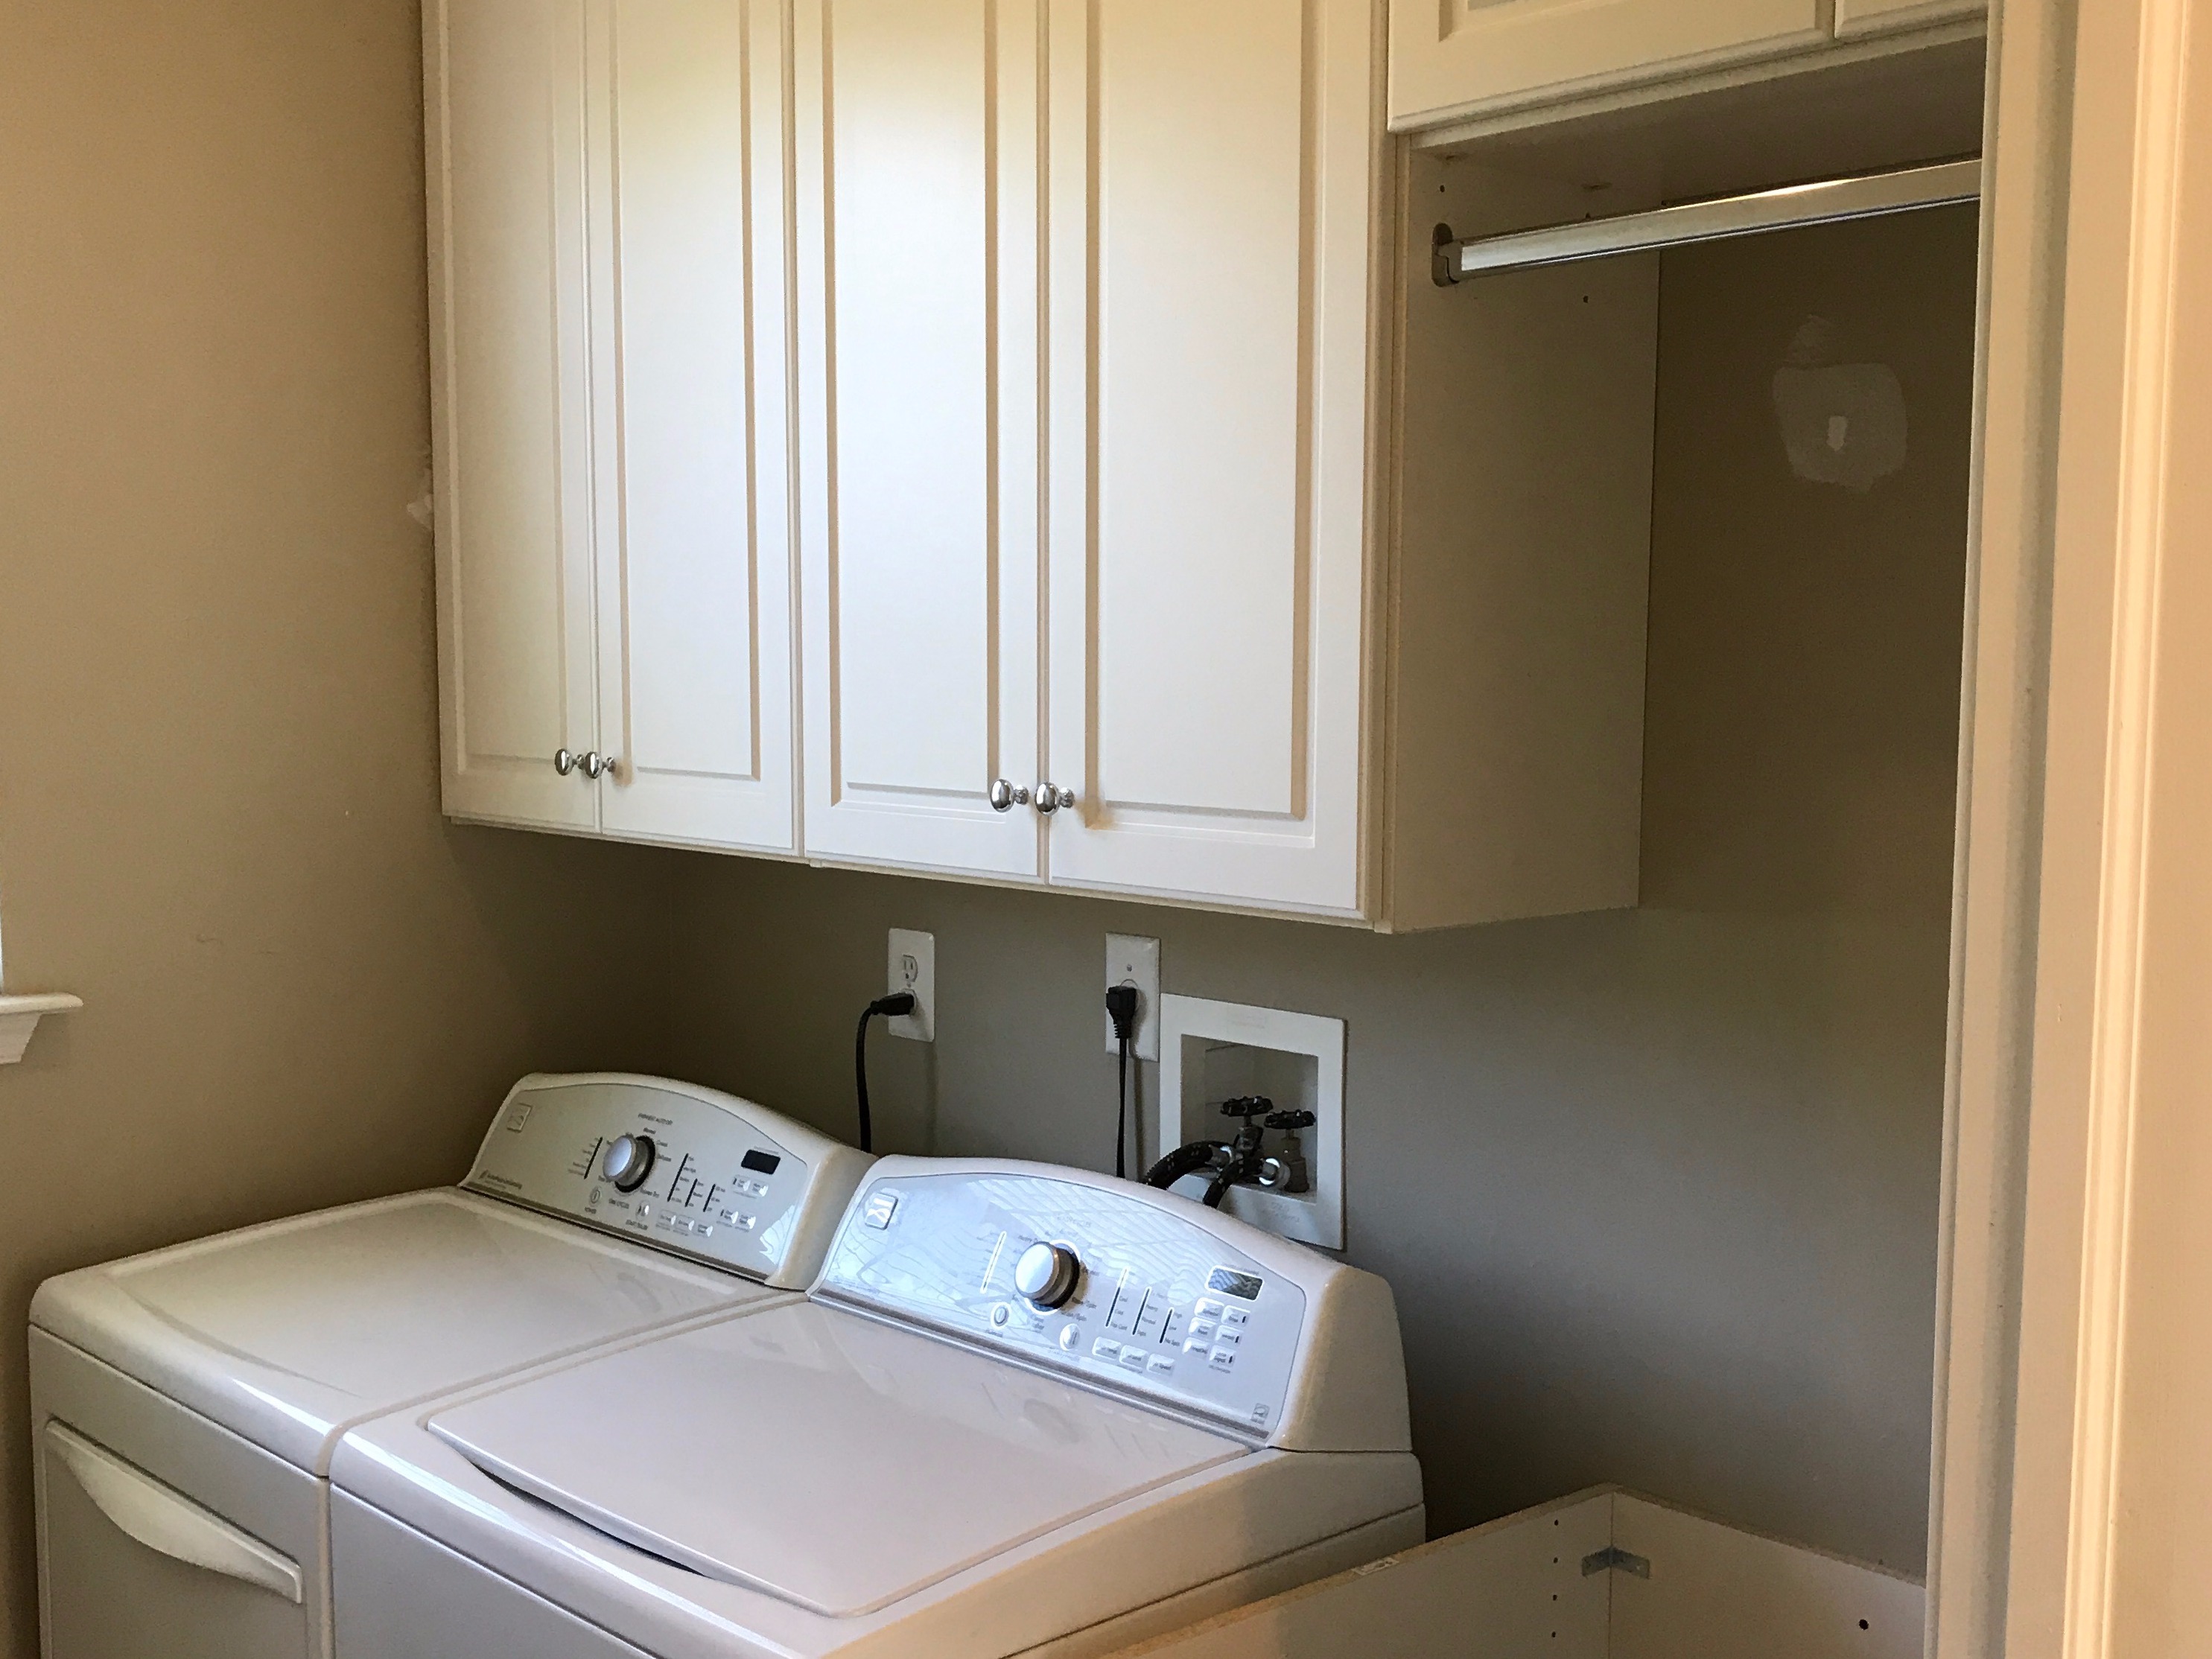 Laundry Rooms | The Closet Gallery